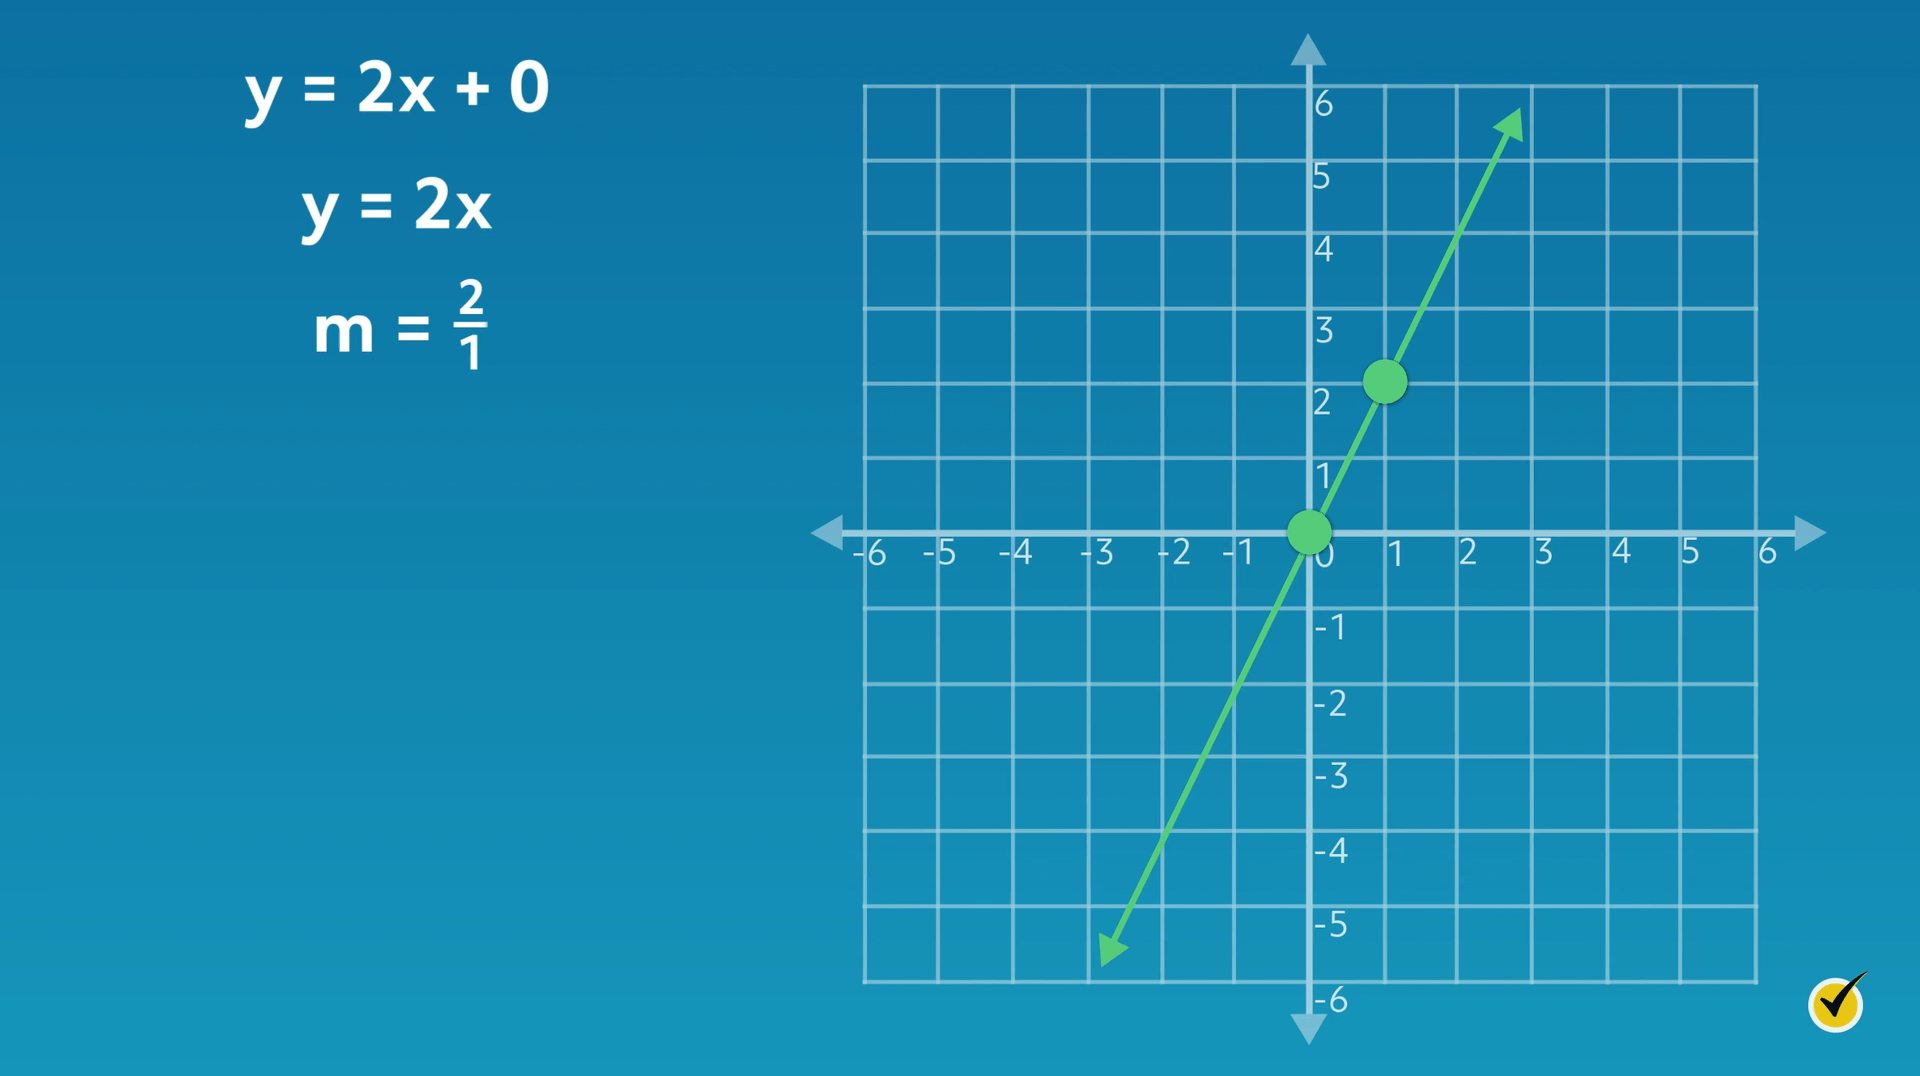 Image of linear equation y=2x+0